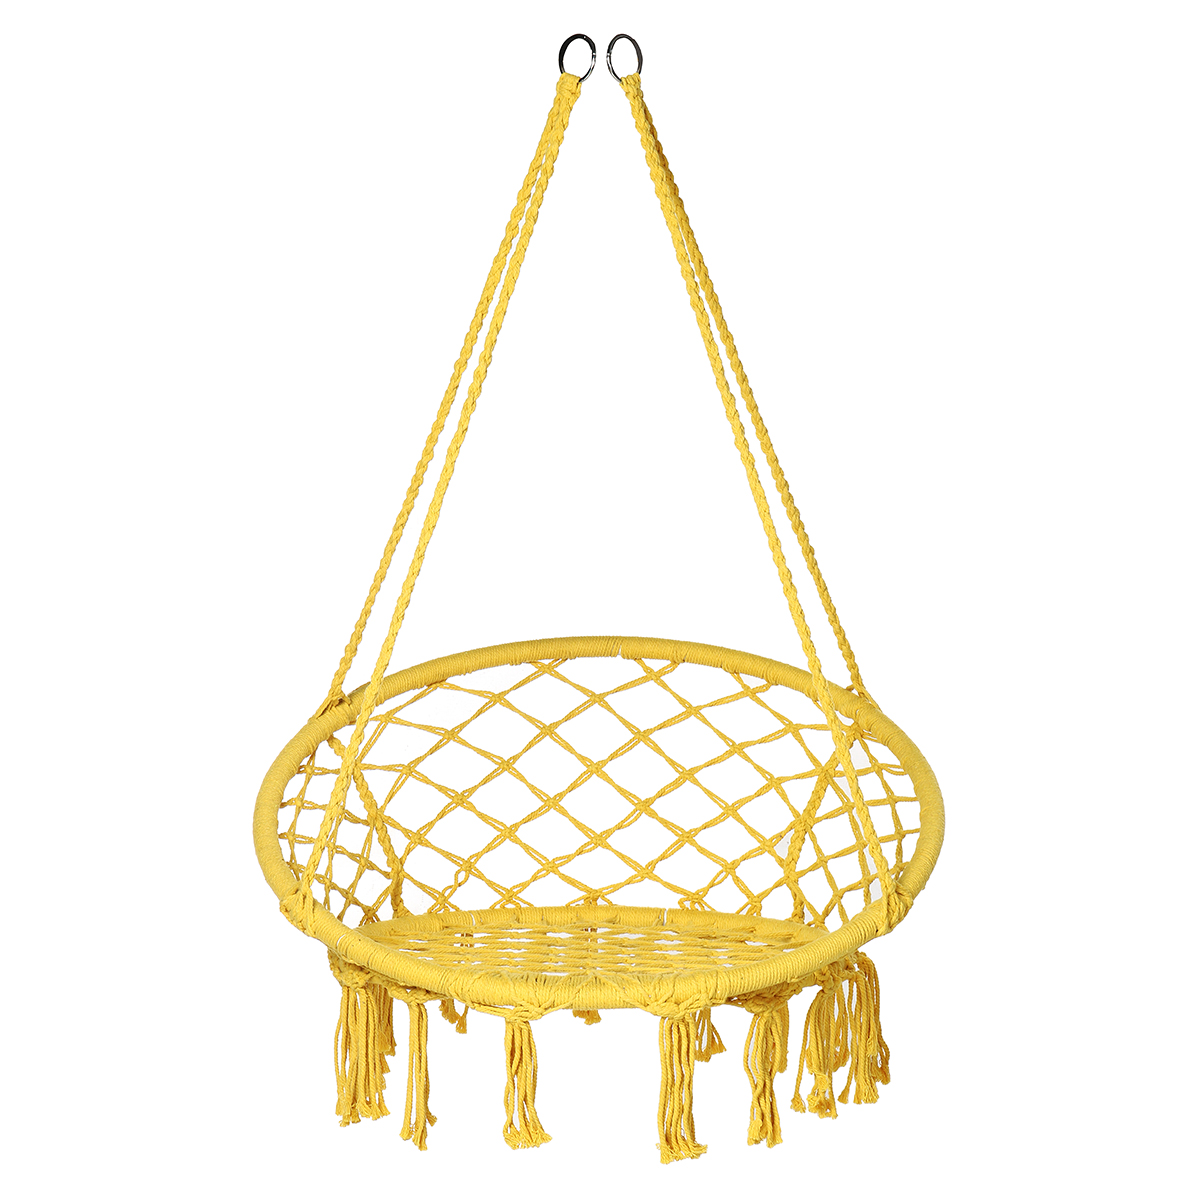 Hammock Chair with Fringe Tassels,Exquisite Dreamy Round Hanging Chair,Cotton Rope Macrame Swing Chairs for Indoor/Outdoor Bedroom Patio Deck or Garden,Handwoven Hammock Hanging Chair Swing - image 4 of 4